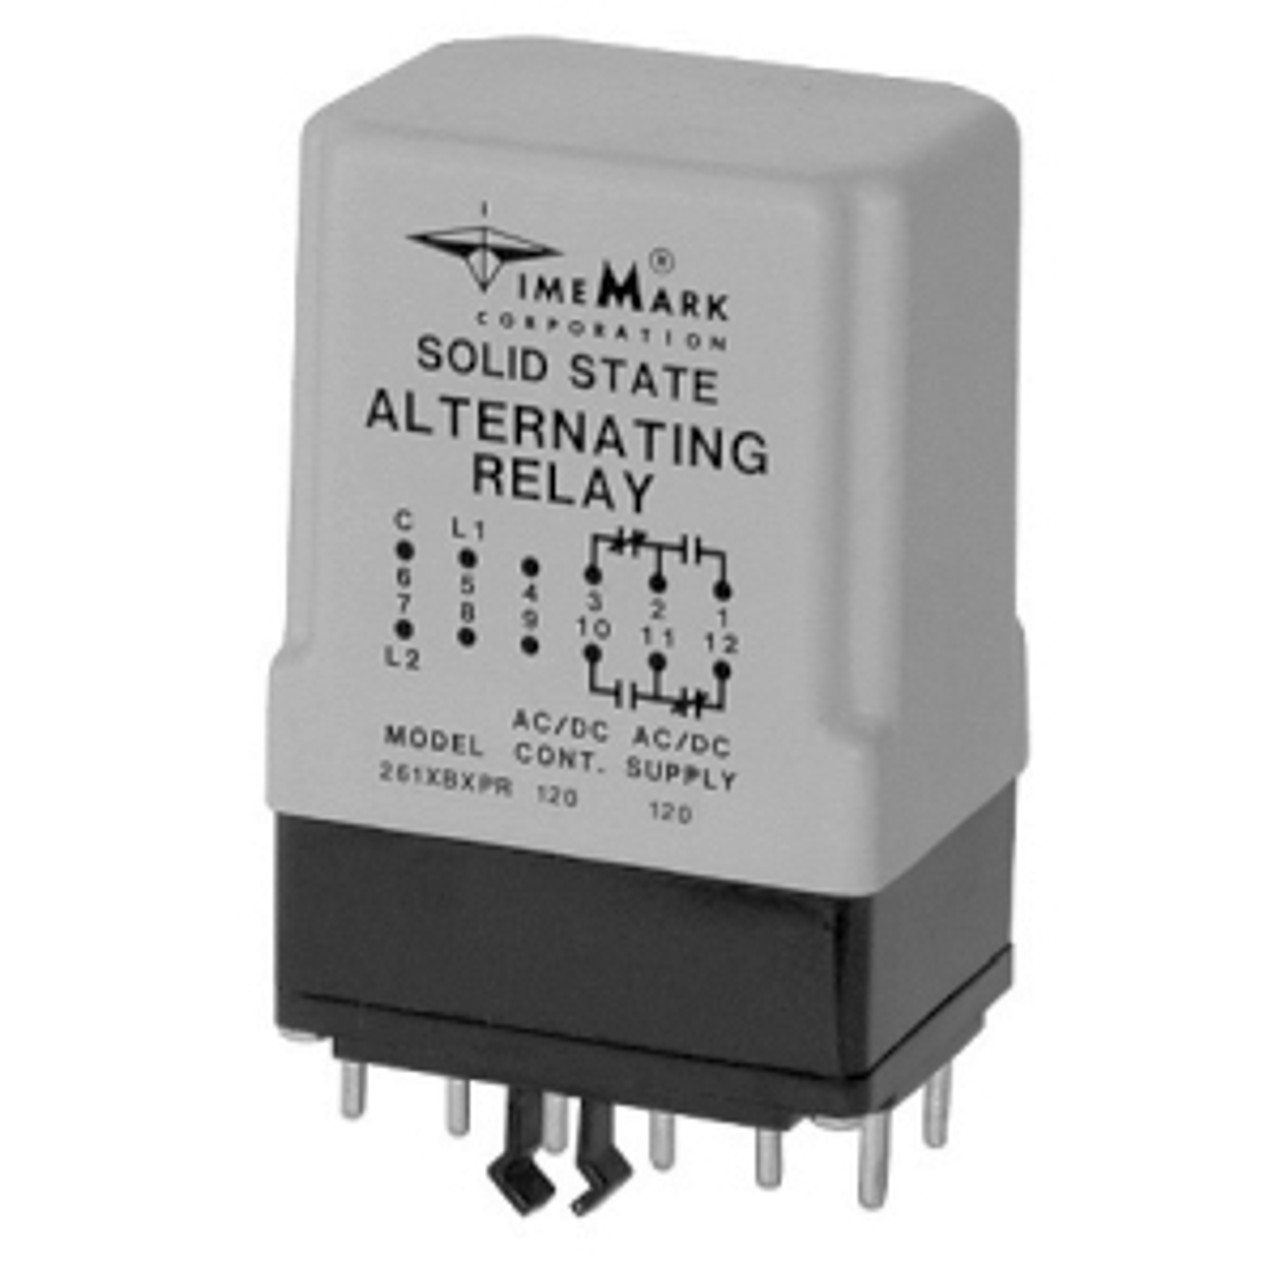 TimeMark 261XBXP-120 Alternating Sequencing Relay